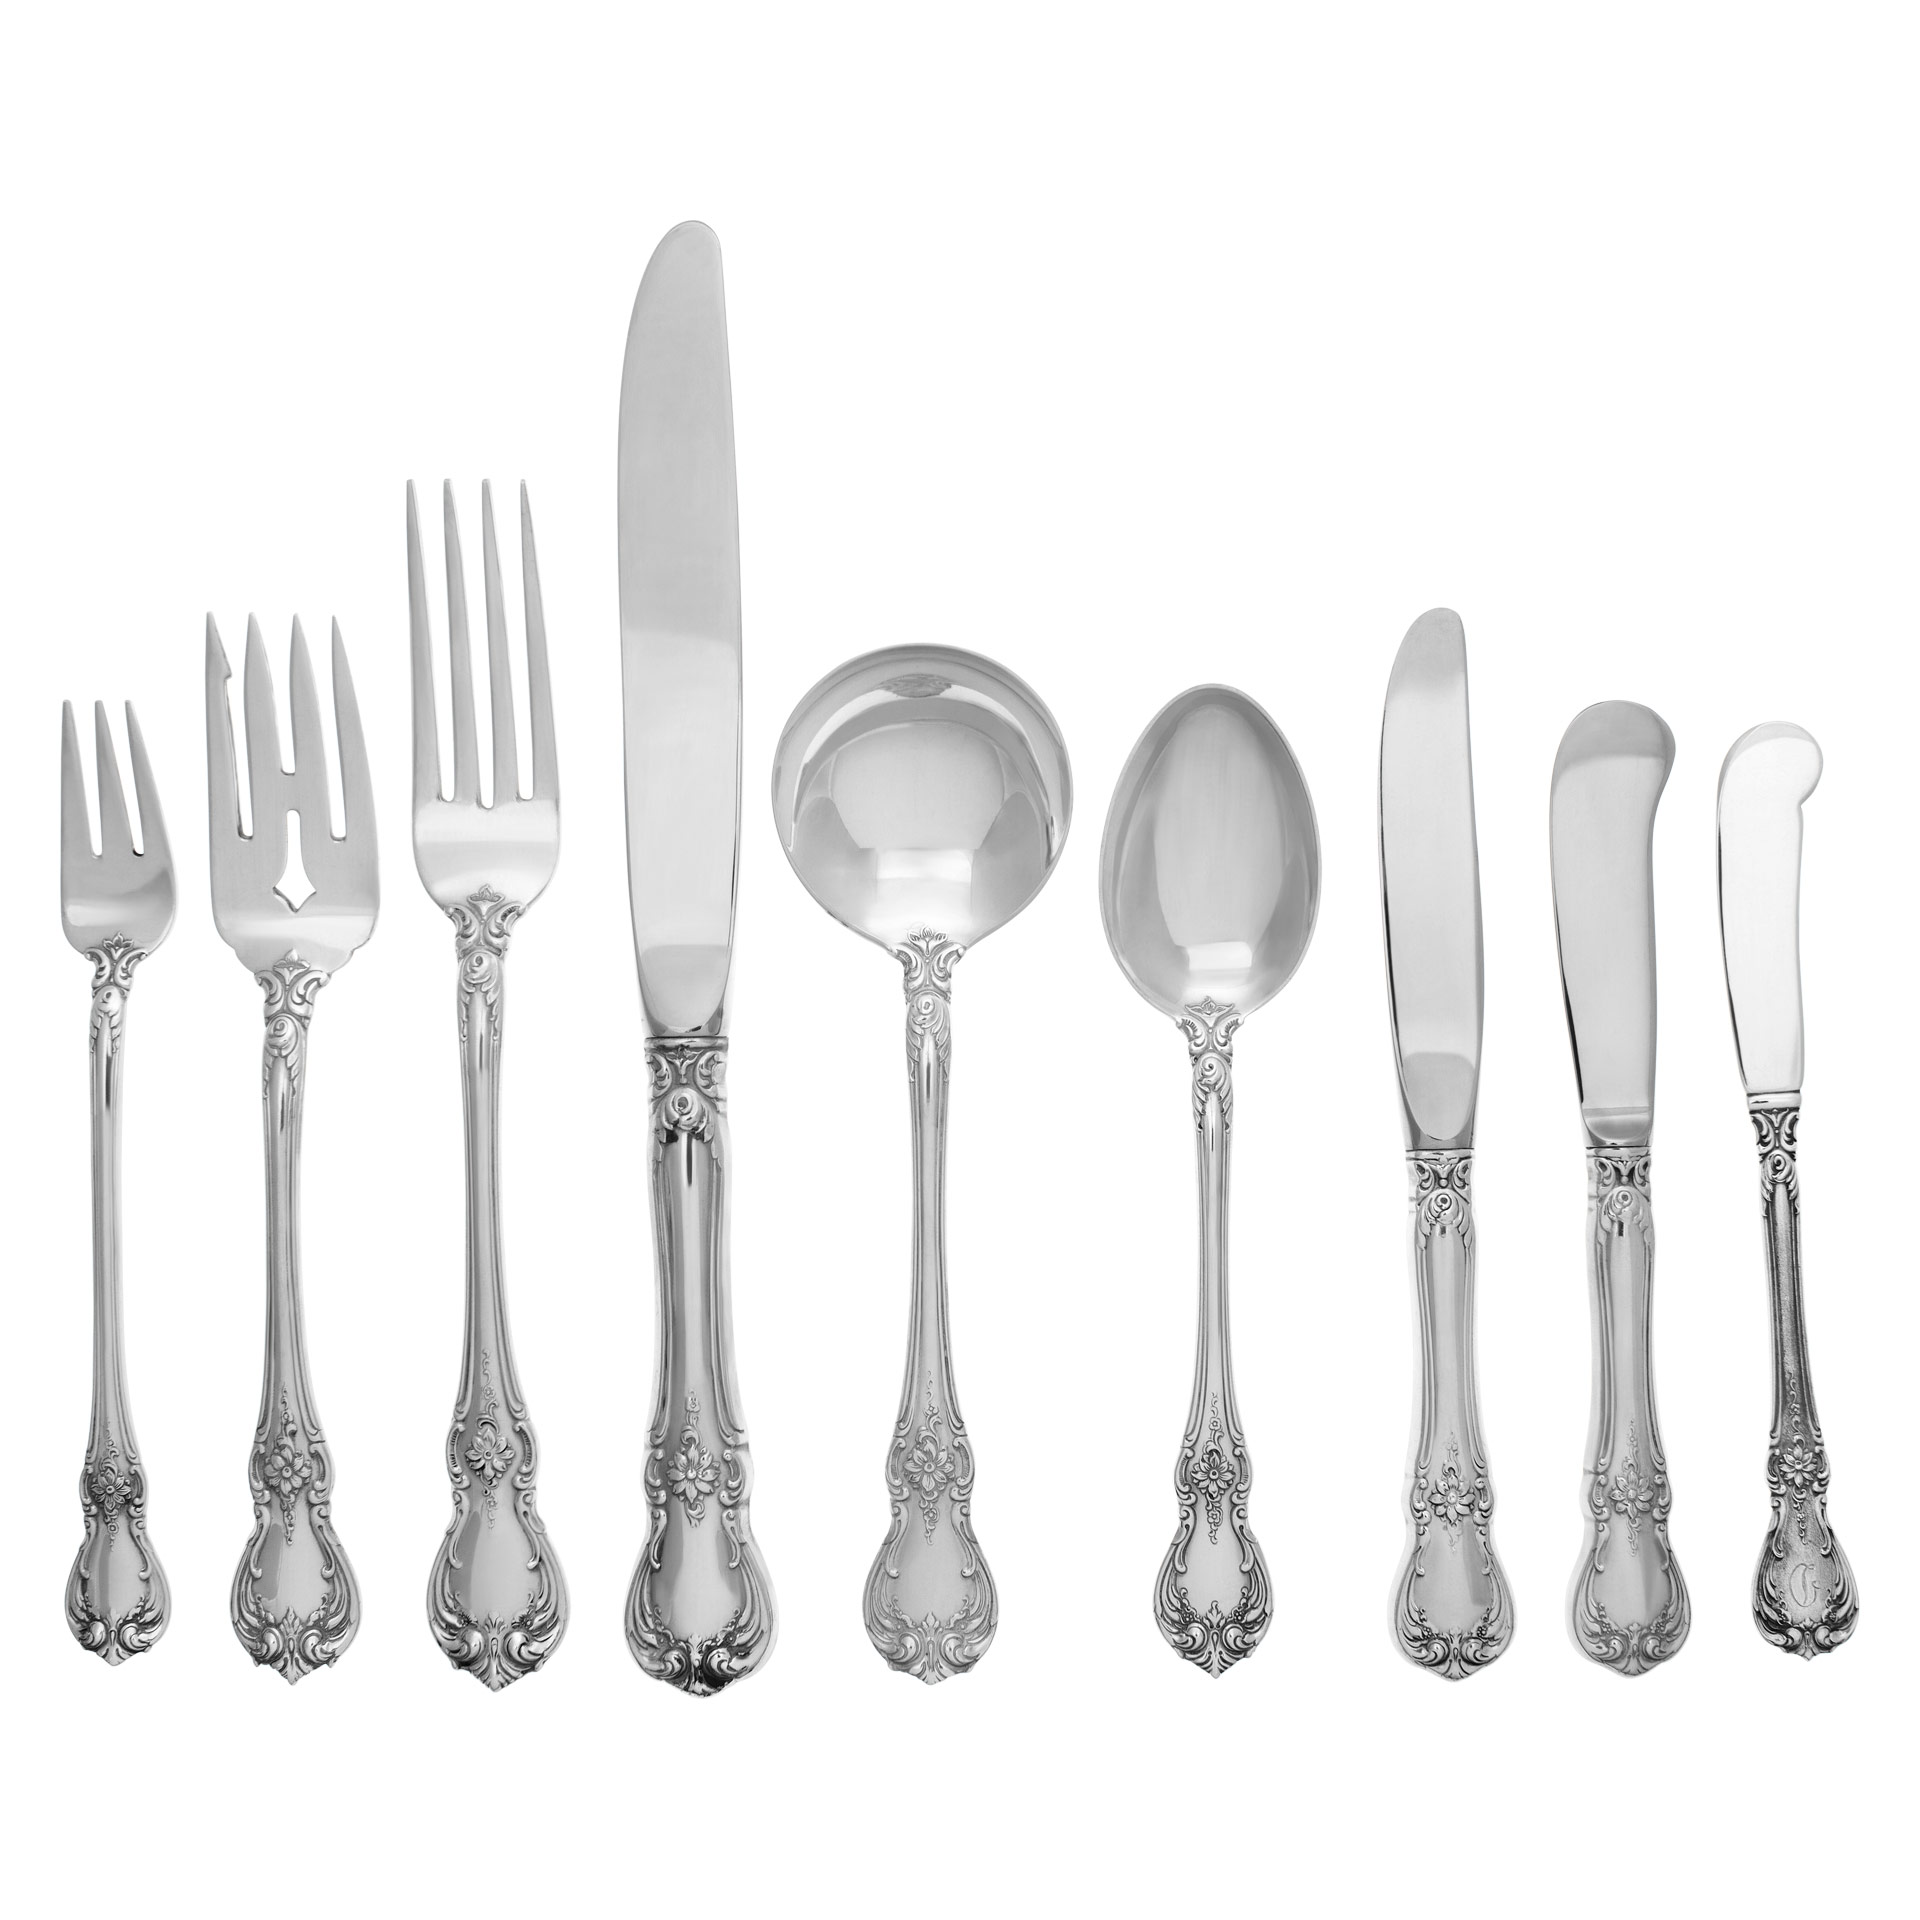 "OLD MASTER" Sterling Silver Flatware Set, Ptd in 1942  by Towle Silversmiths. 128 PIECES TOTAL- 6 Place Settings for 20 (xtra) + 7 Serving Pieces- 162 ounces troy of .925  Sterling Silver.TOTAL 139 pieces. image 1